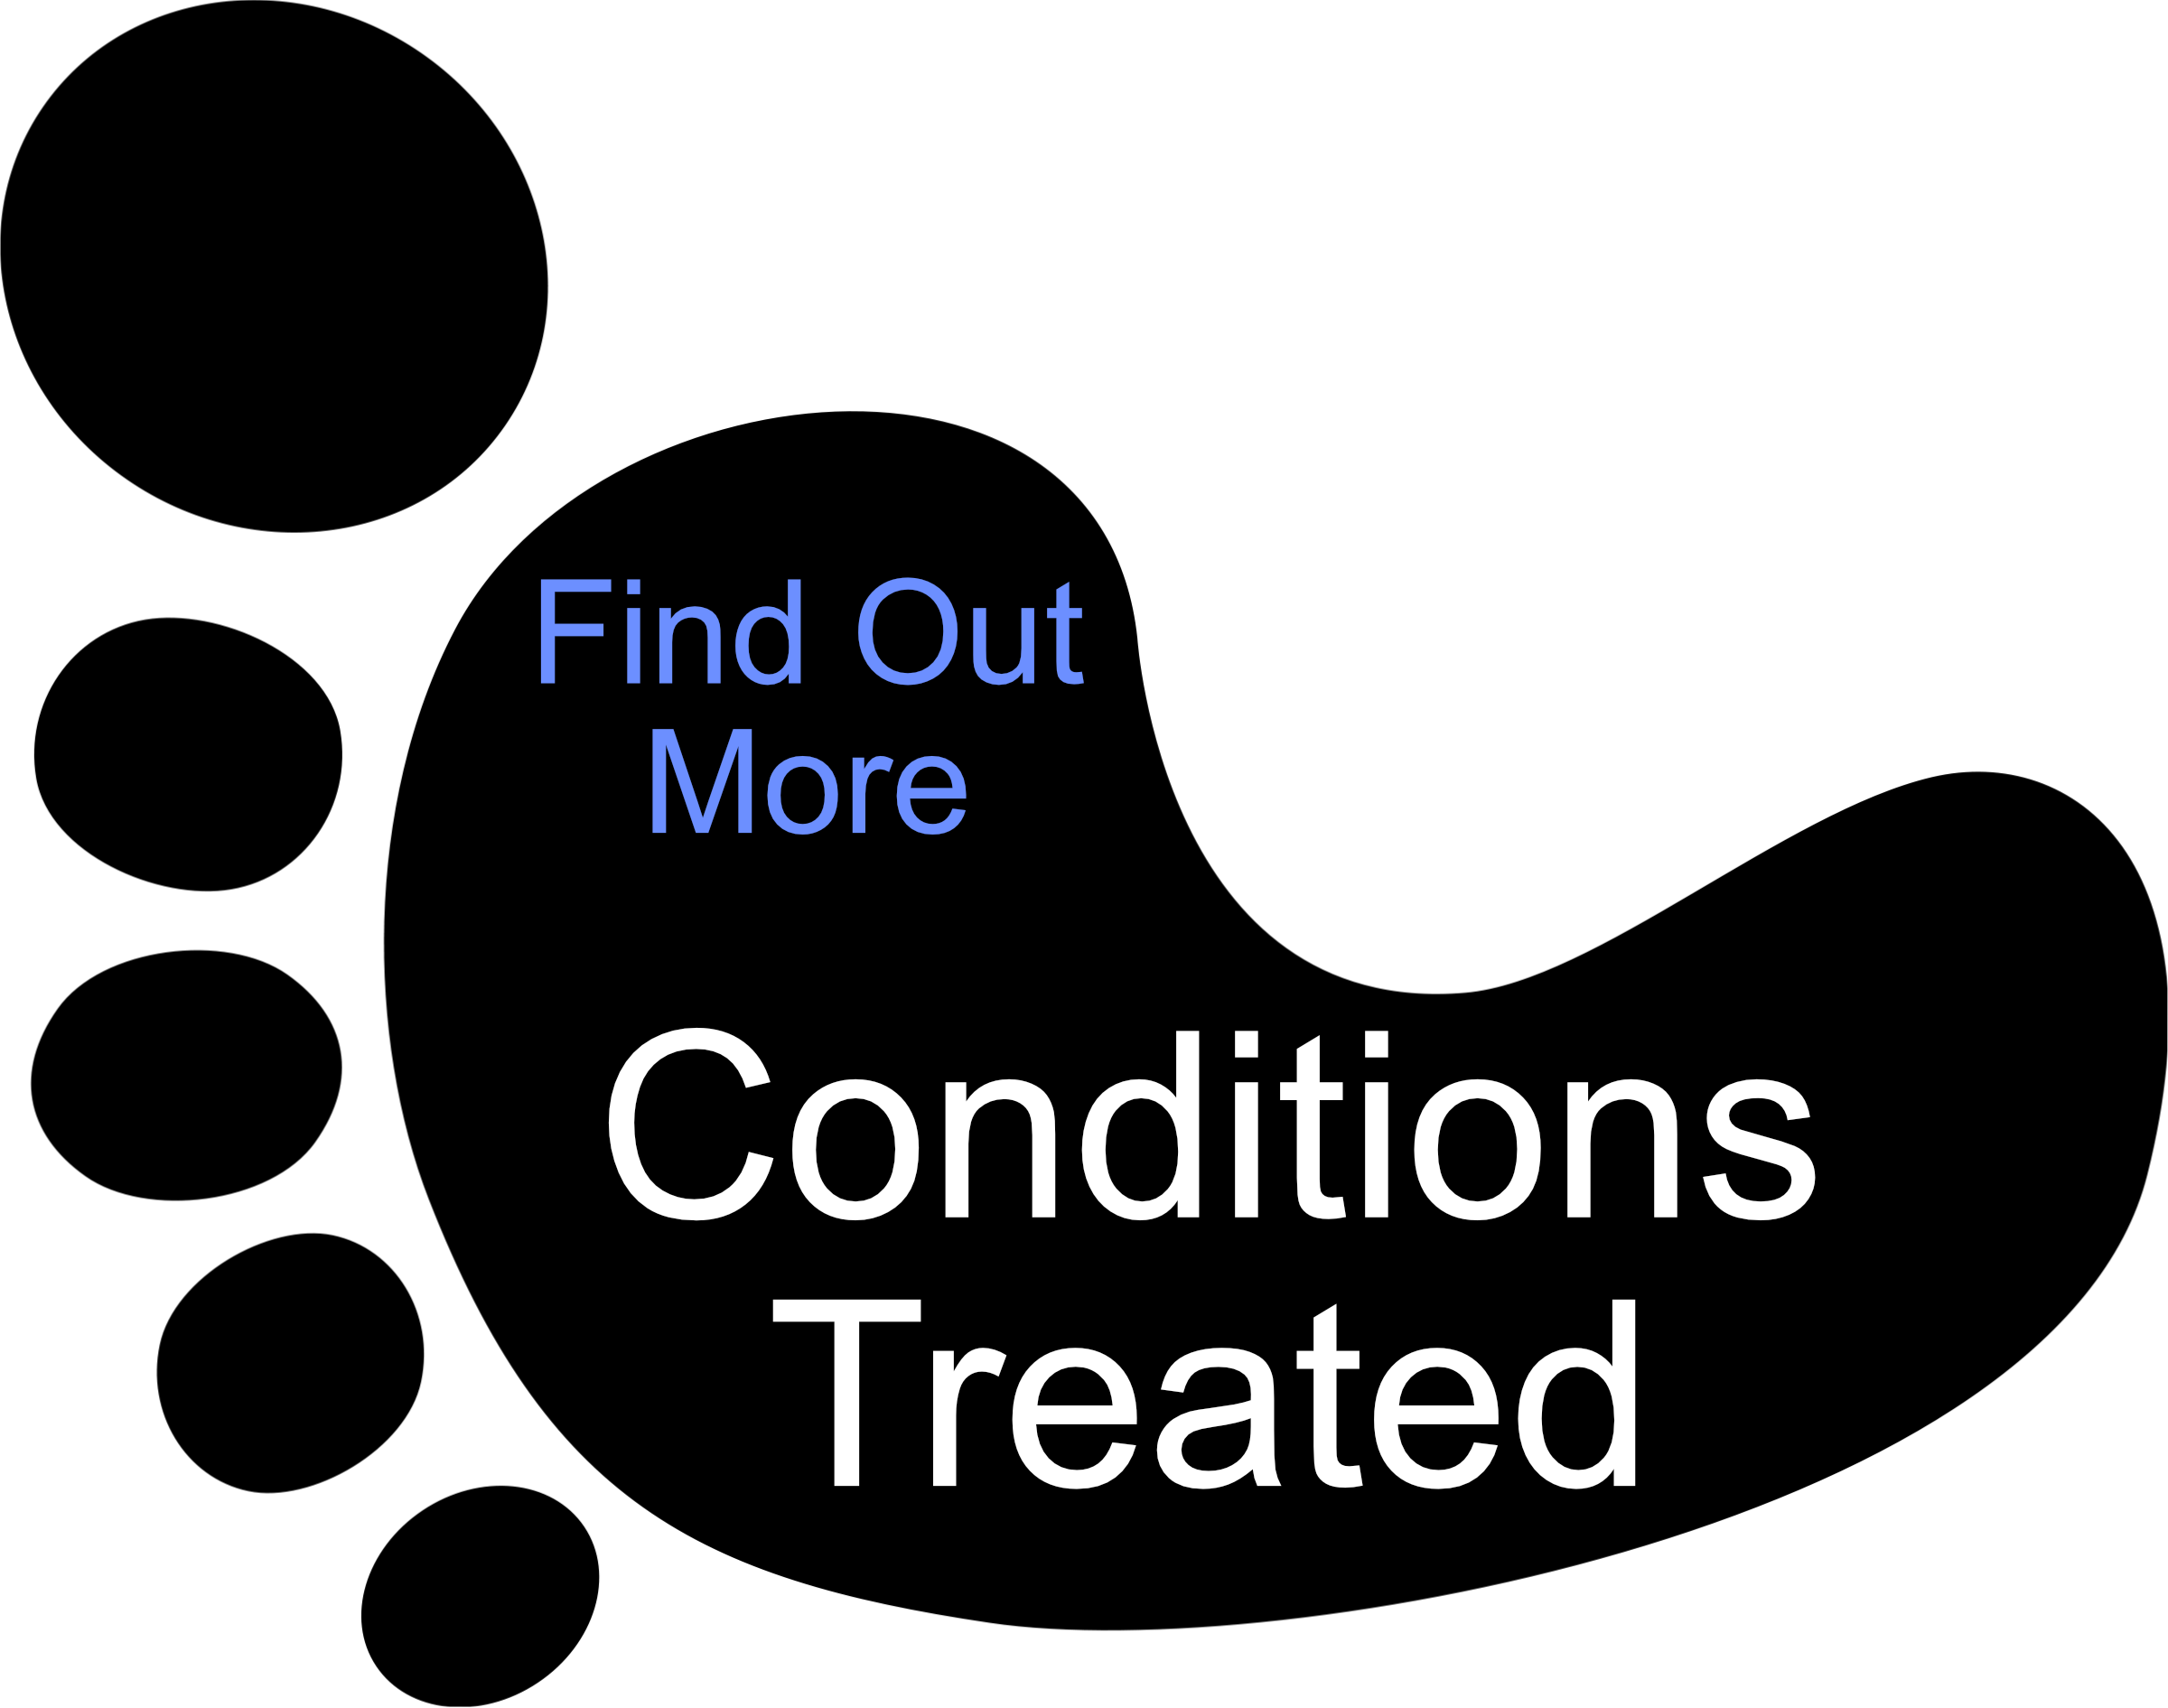 conditions treated image